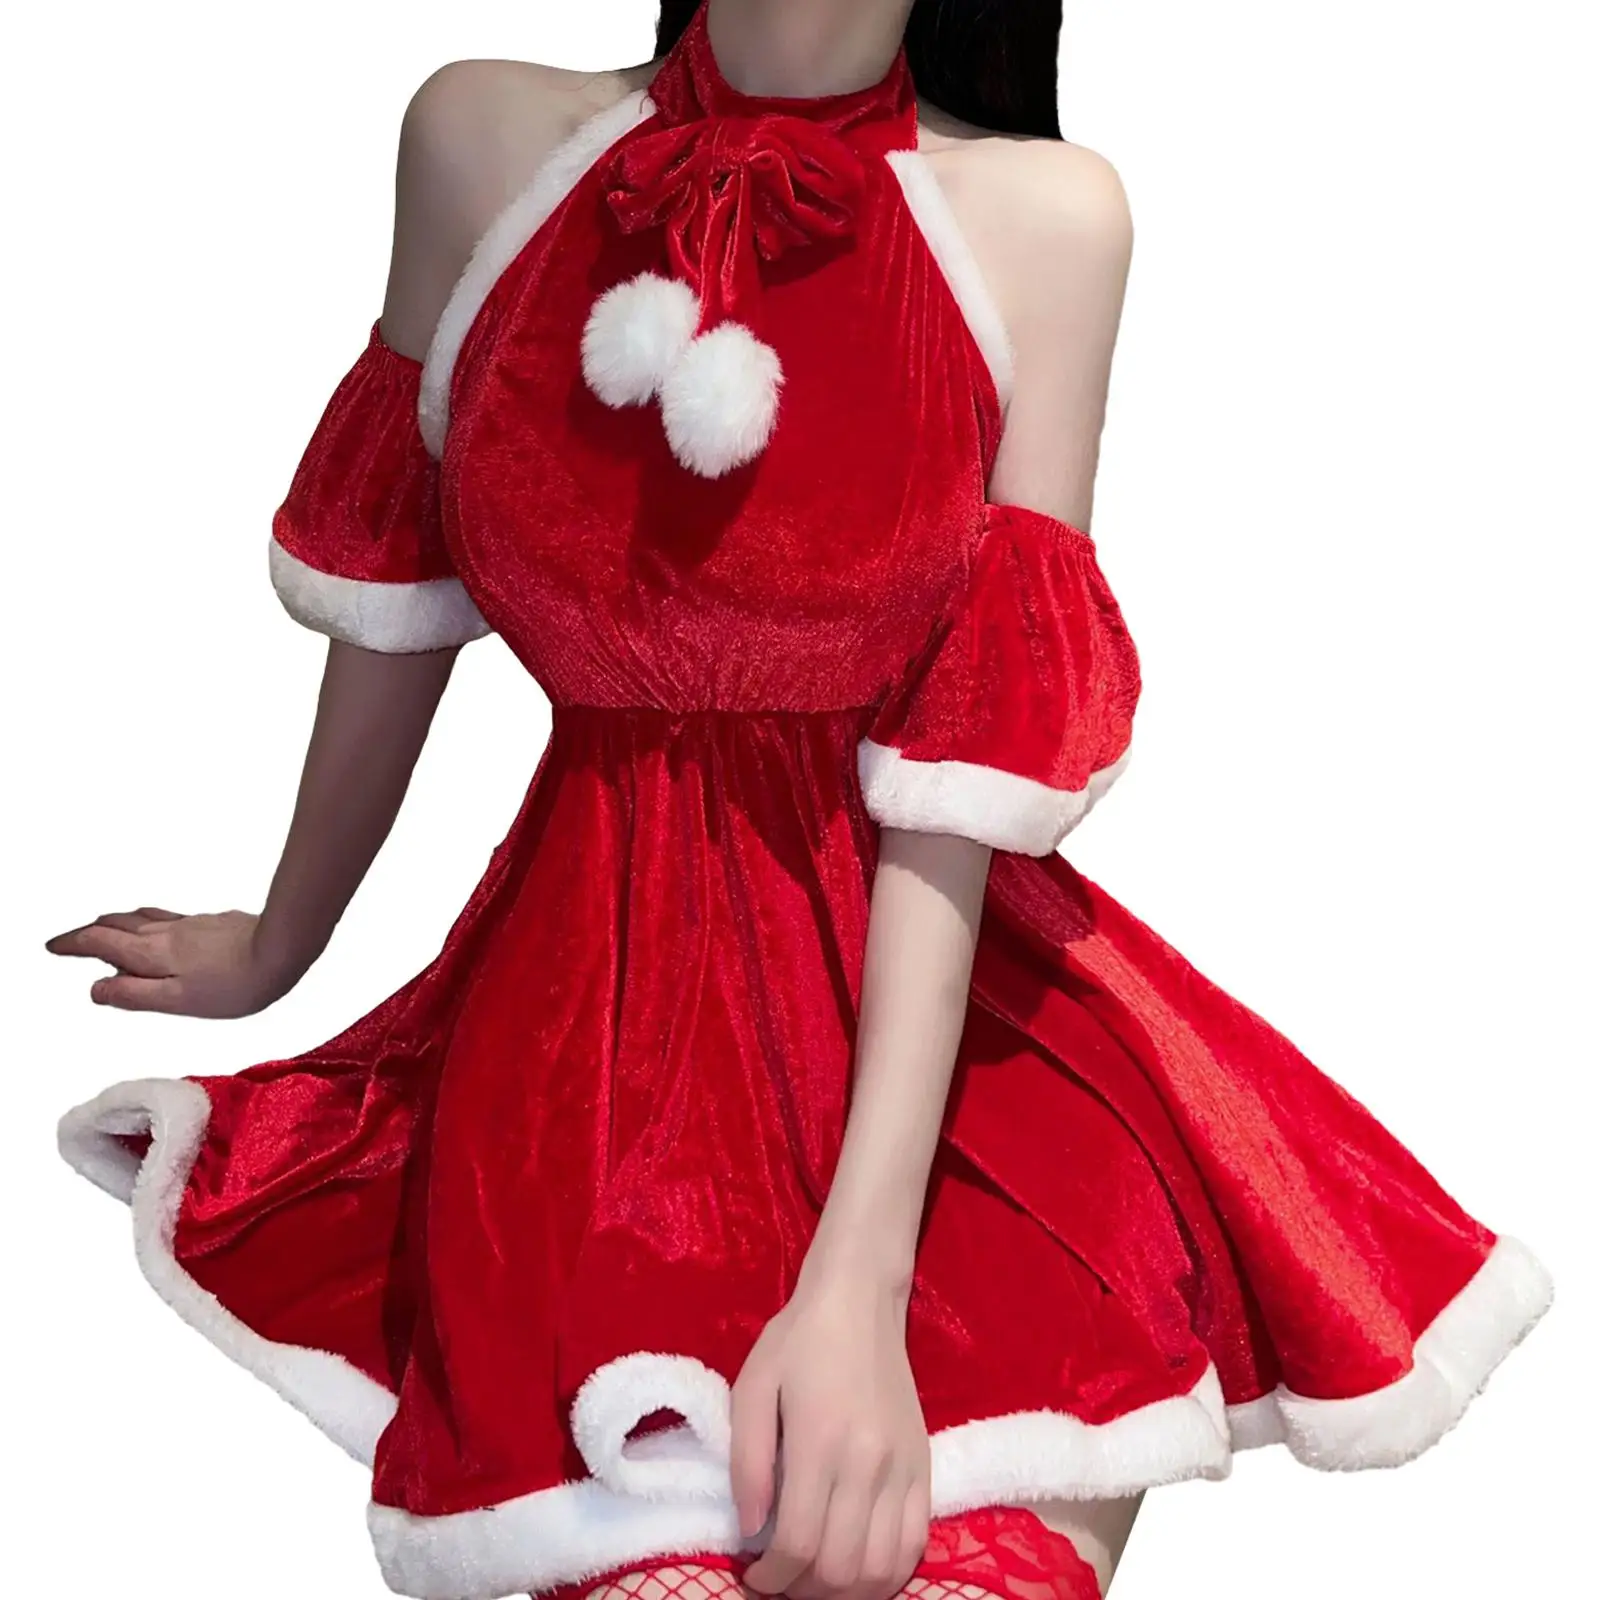 

Womens Christmas Lingerie Xmas Costume Clothing Santa Claus Mini Dress for Valentine's Day Role Play Date Night Clubwear